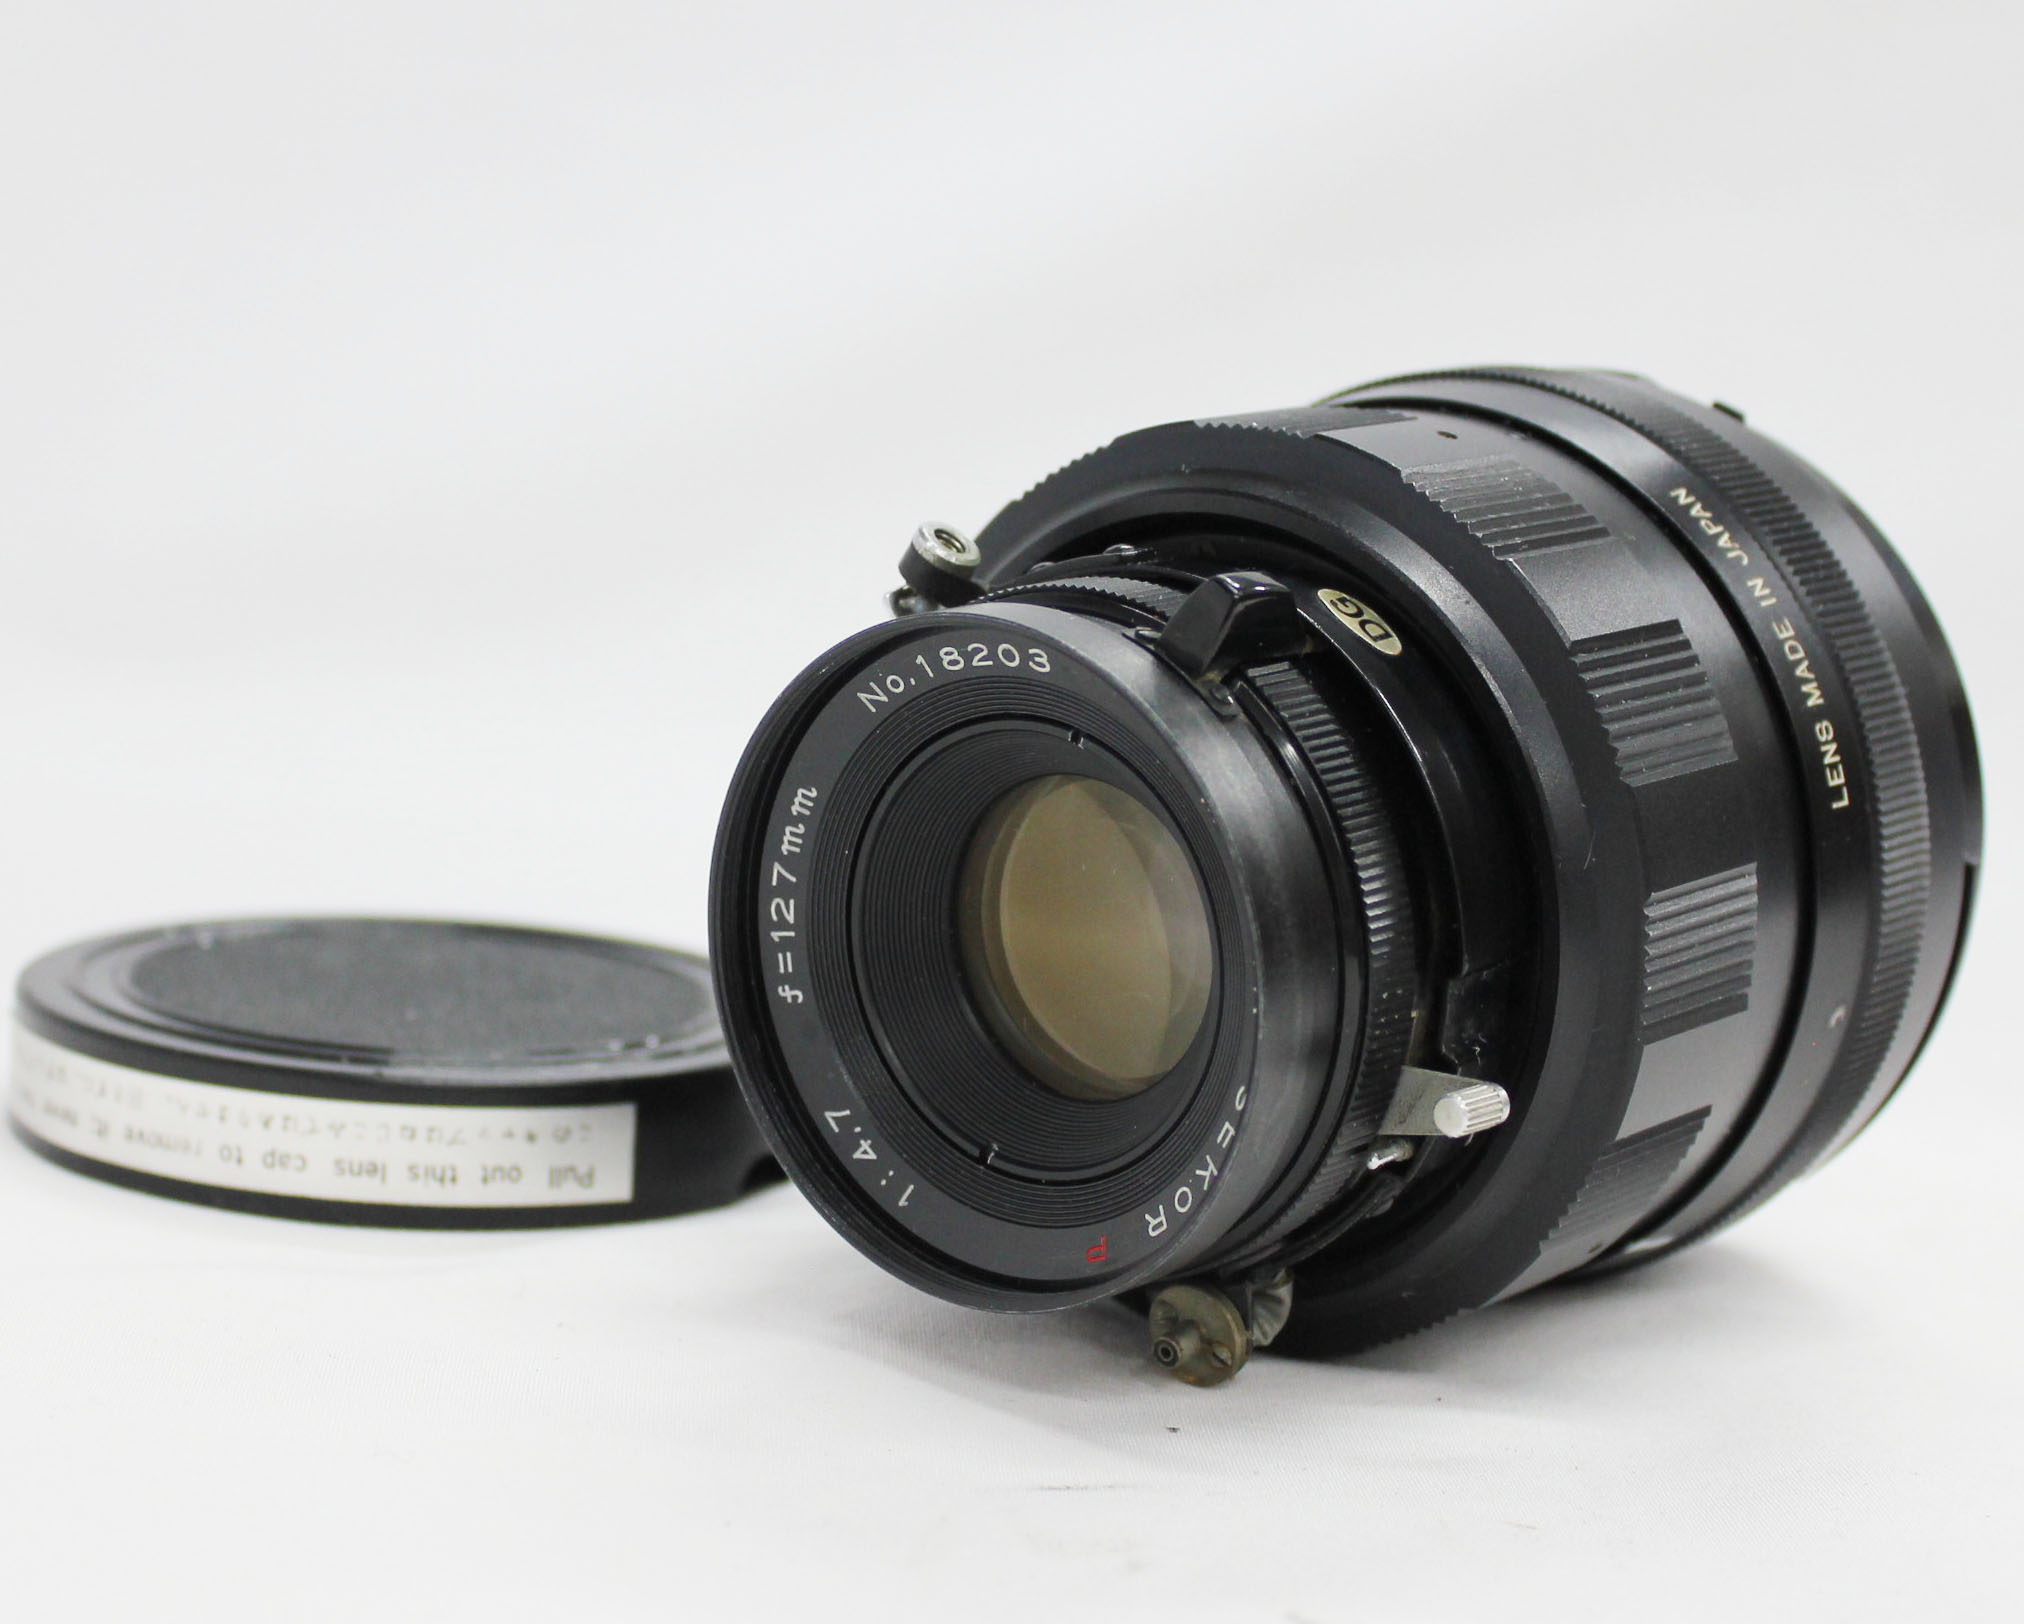 Japan Used Camera Shop | [Exc+++] Mamiya-Sekor P 127mm F/4.7 Lens for Universal Press Super 23 from Japan